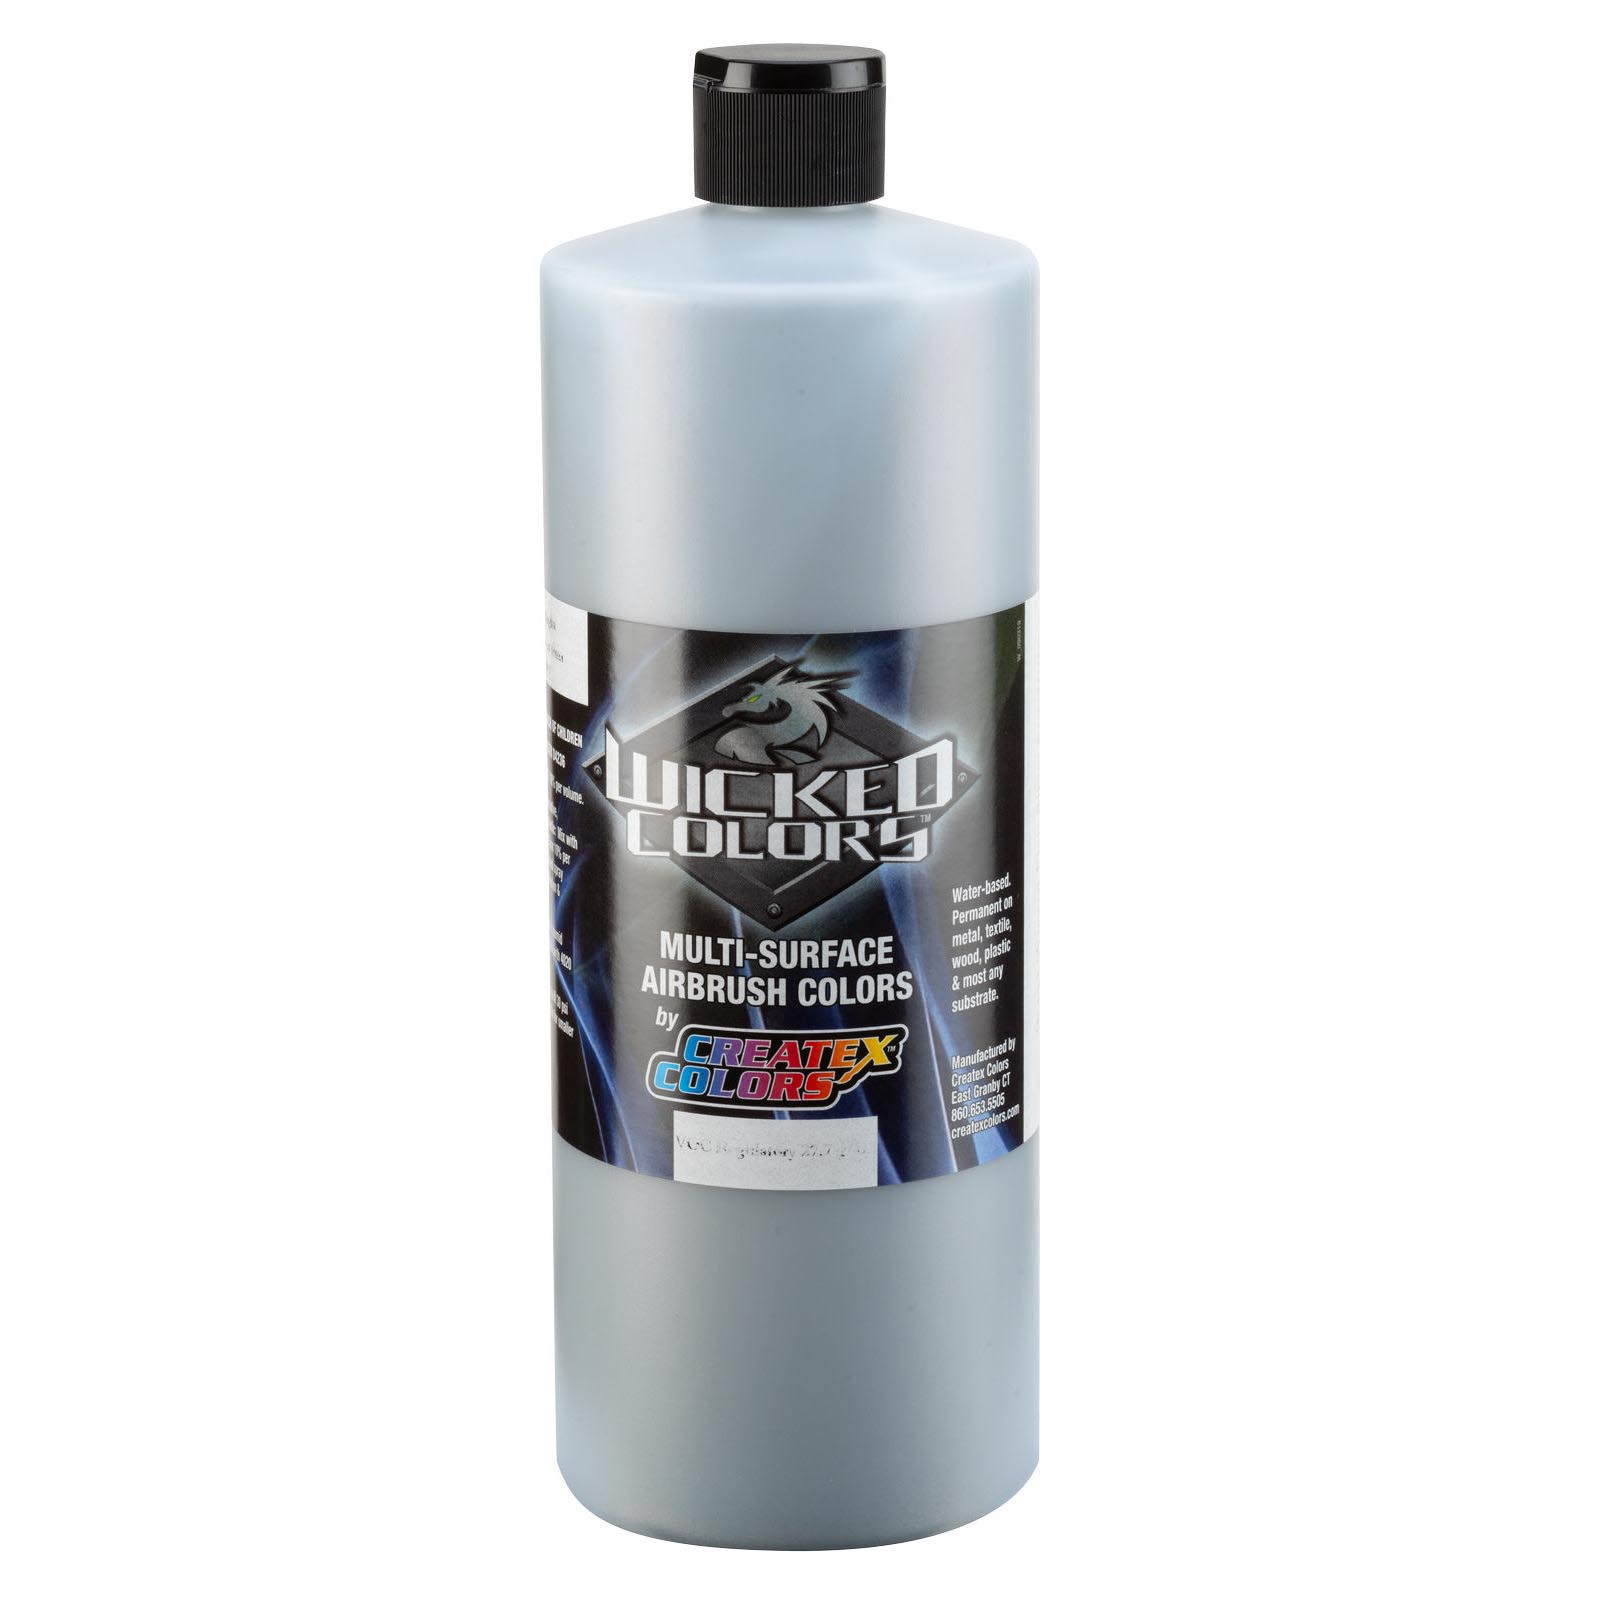 Wicked Colors - W453 Flair Silver Spectrum - Airbrush Paint Direct